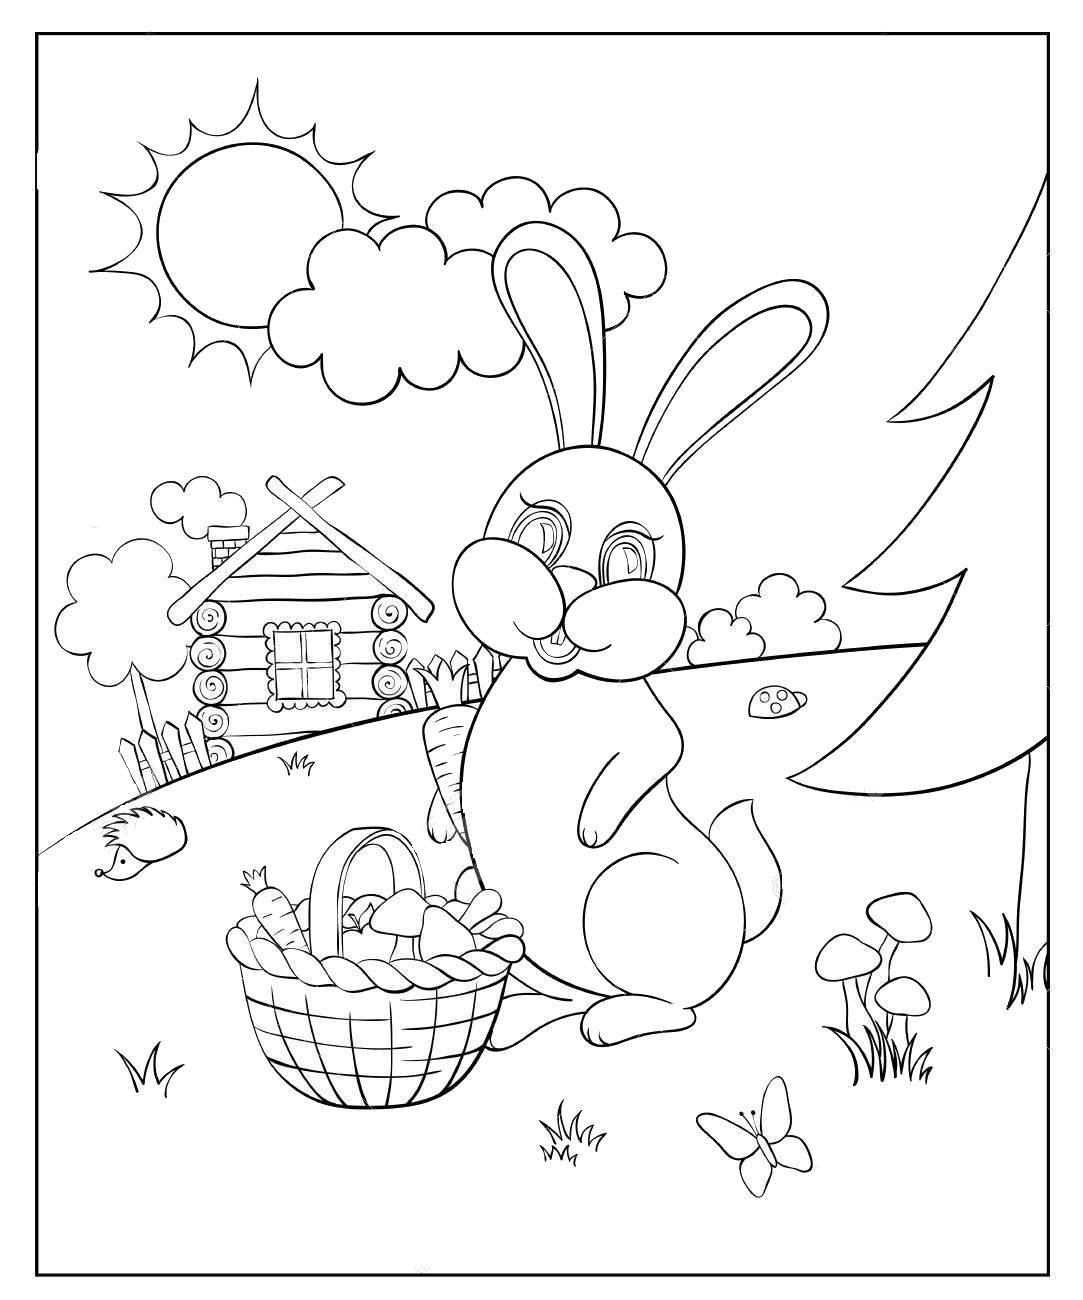 Coloring for kids with rabbit and carrots